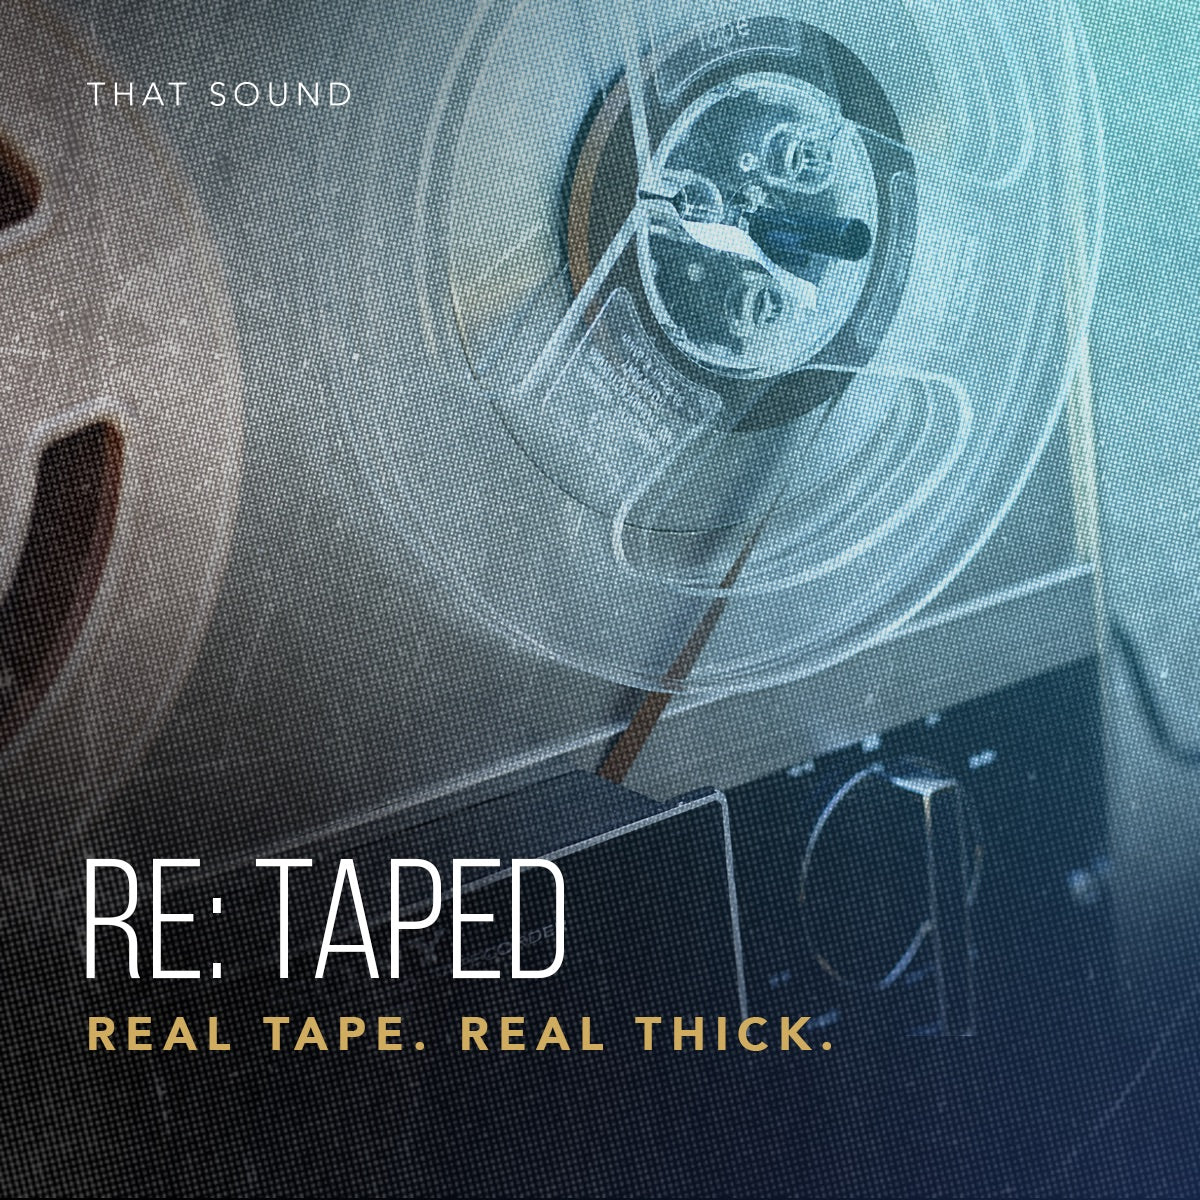 Re: Taped